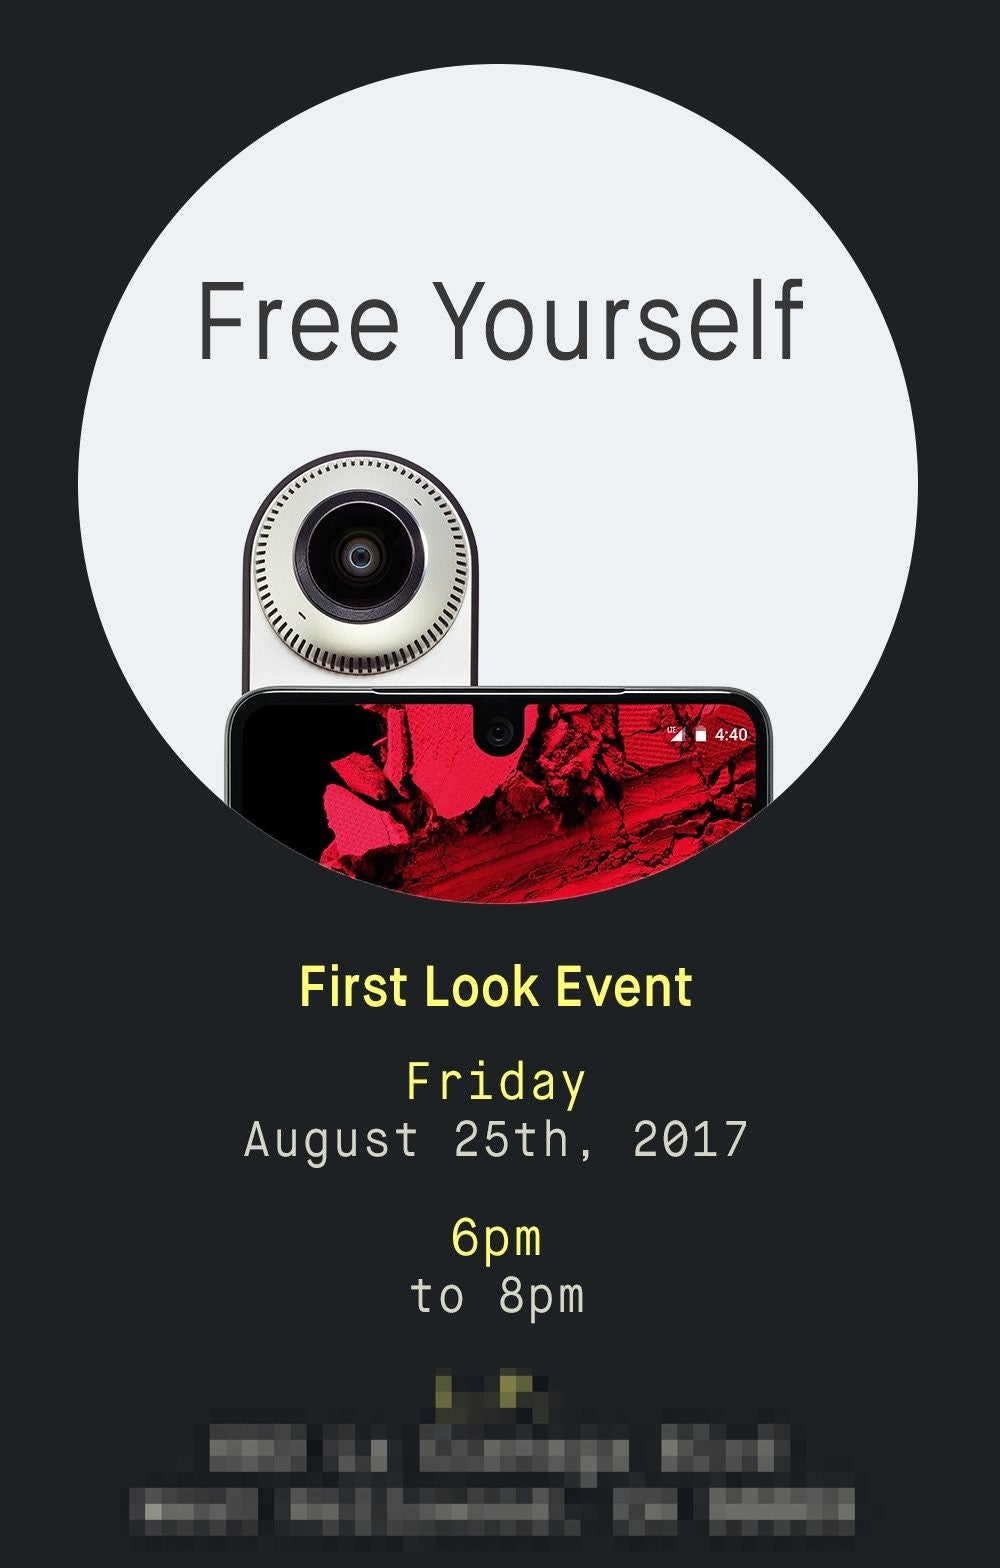 The Essential Phone will be showcased at a “First Look” event on August 25